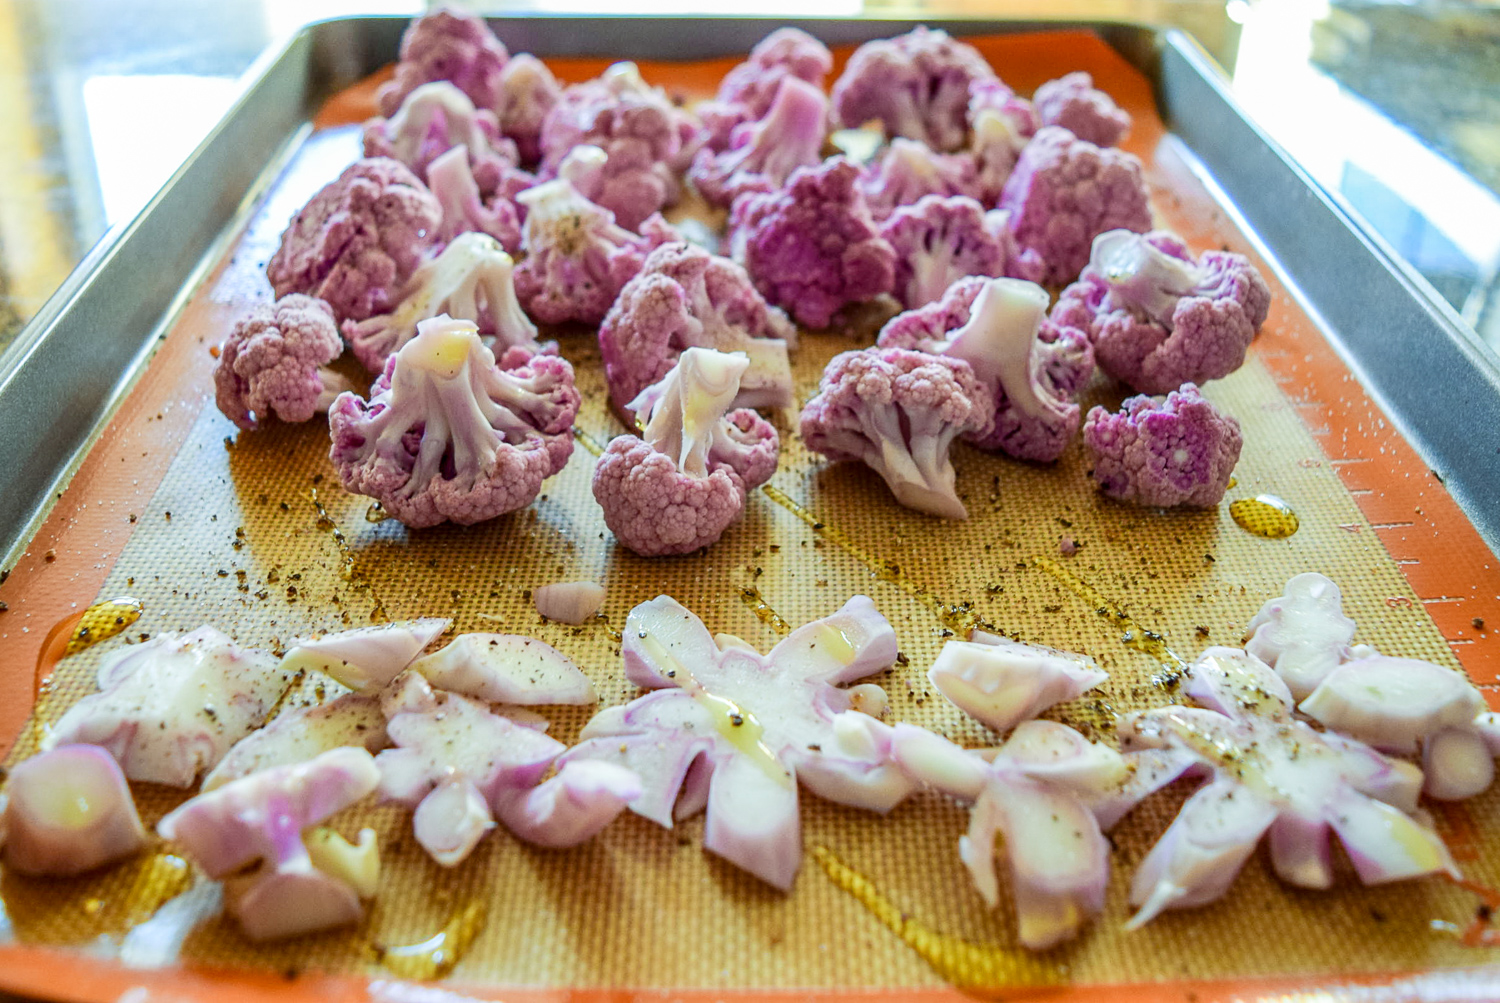 Raw purple cauliflower cut up stem pieces and florets on silicone baking sheet on Calphalon baking sheet from the side with olive oil and salt and pepper